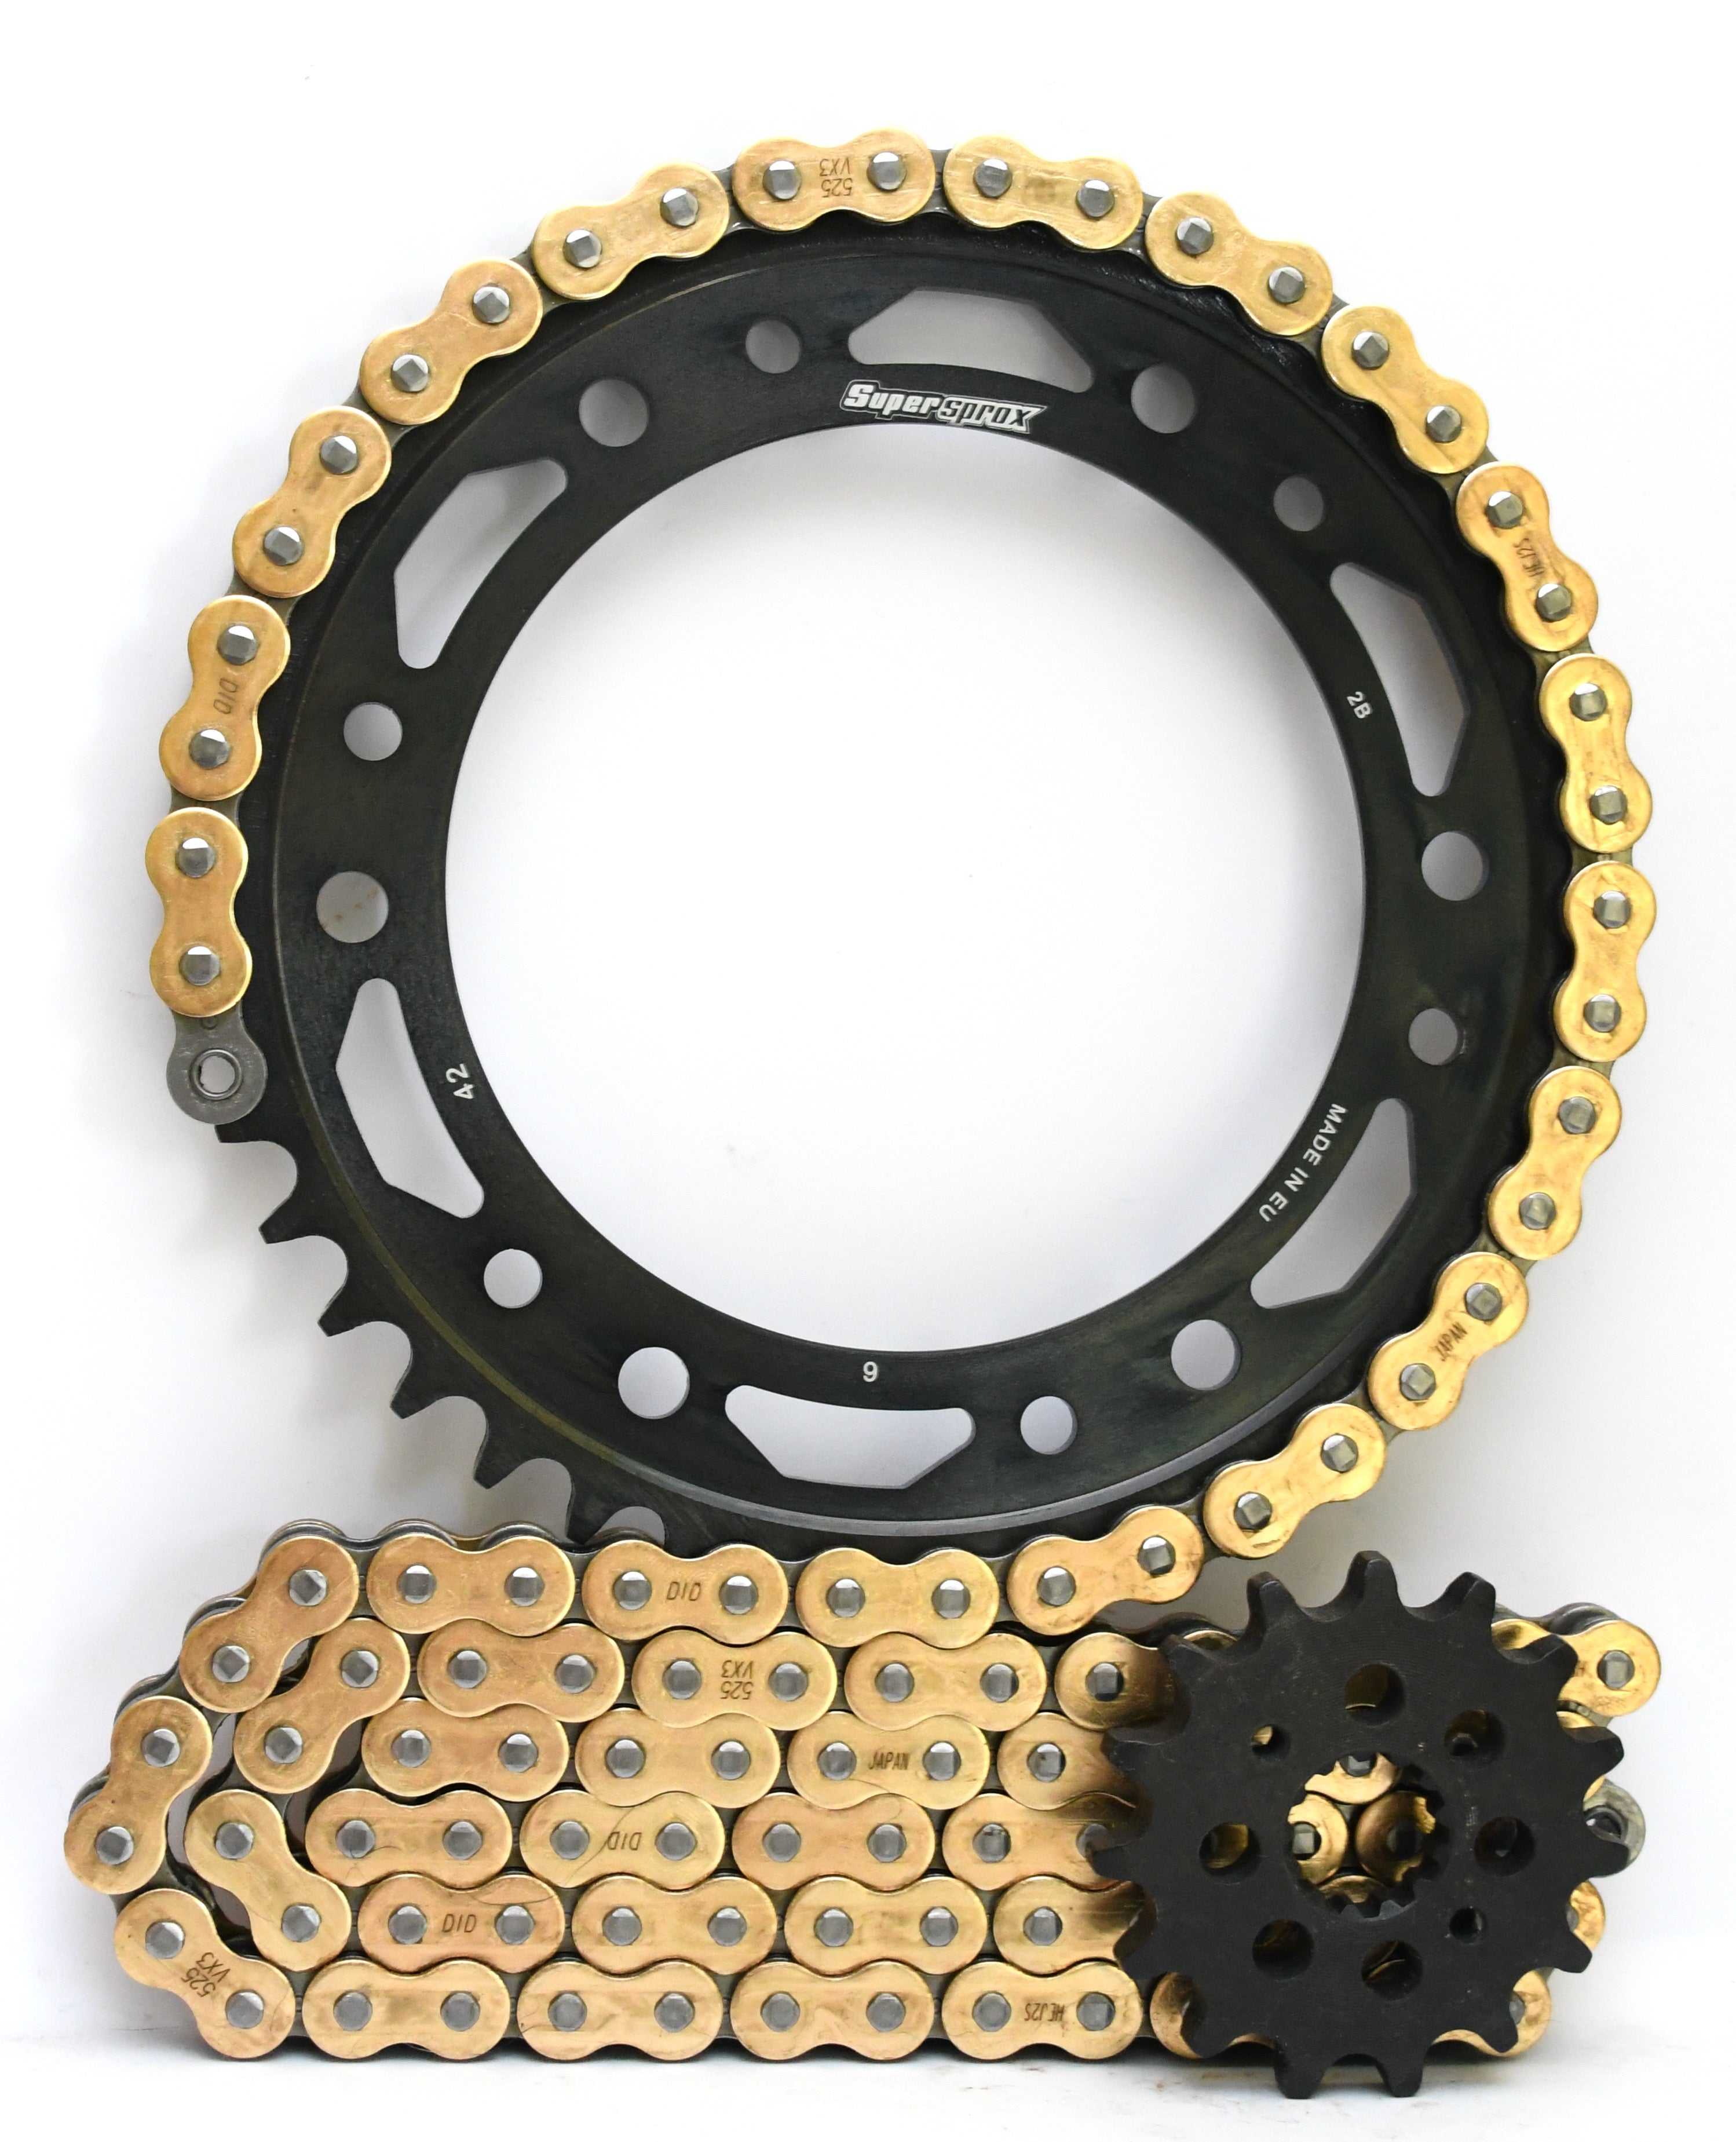 Supersprox Chain and Steel Sprocket Kit - BMW F800GS 2008-2018 - Standard Gearing